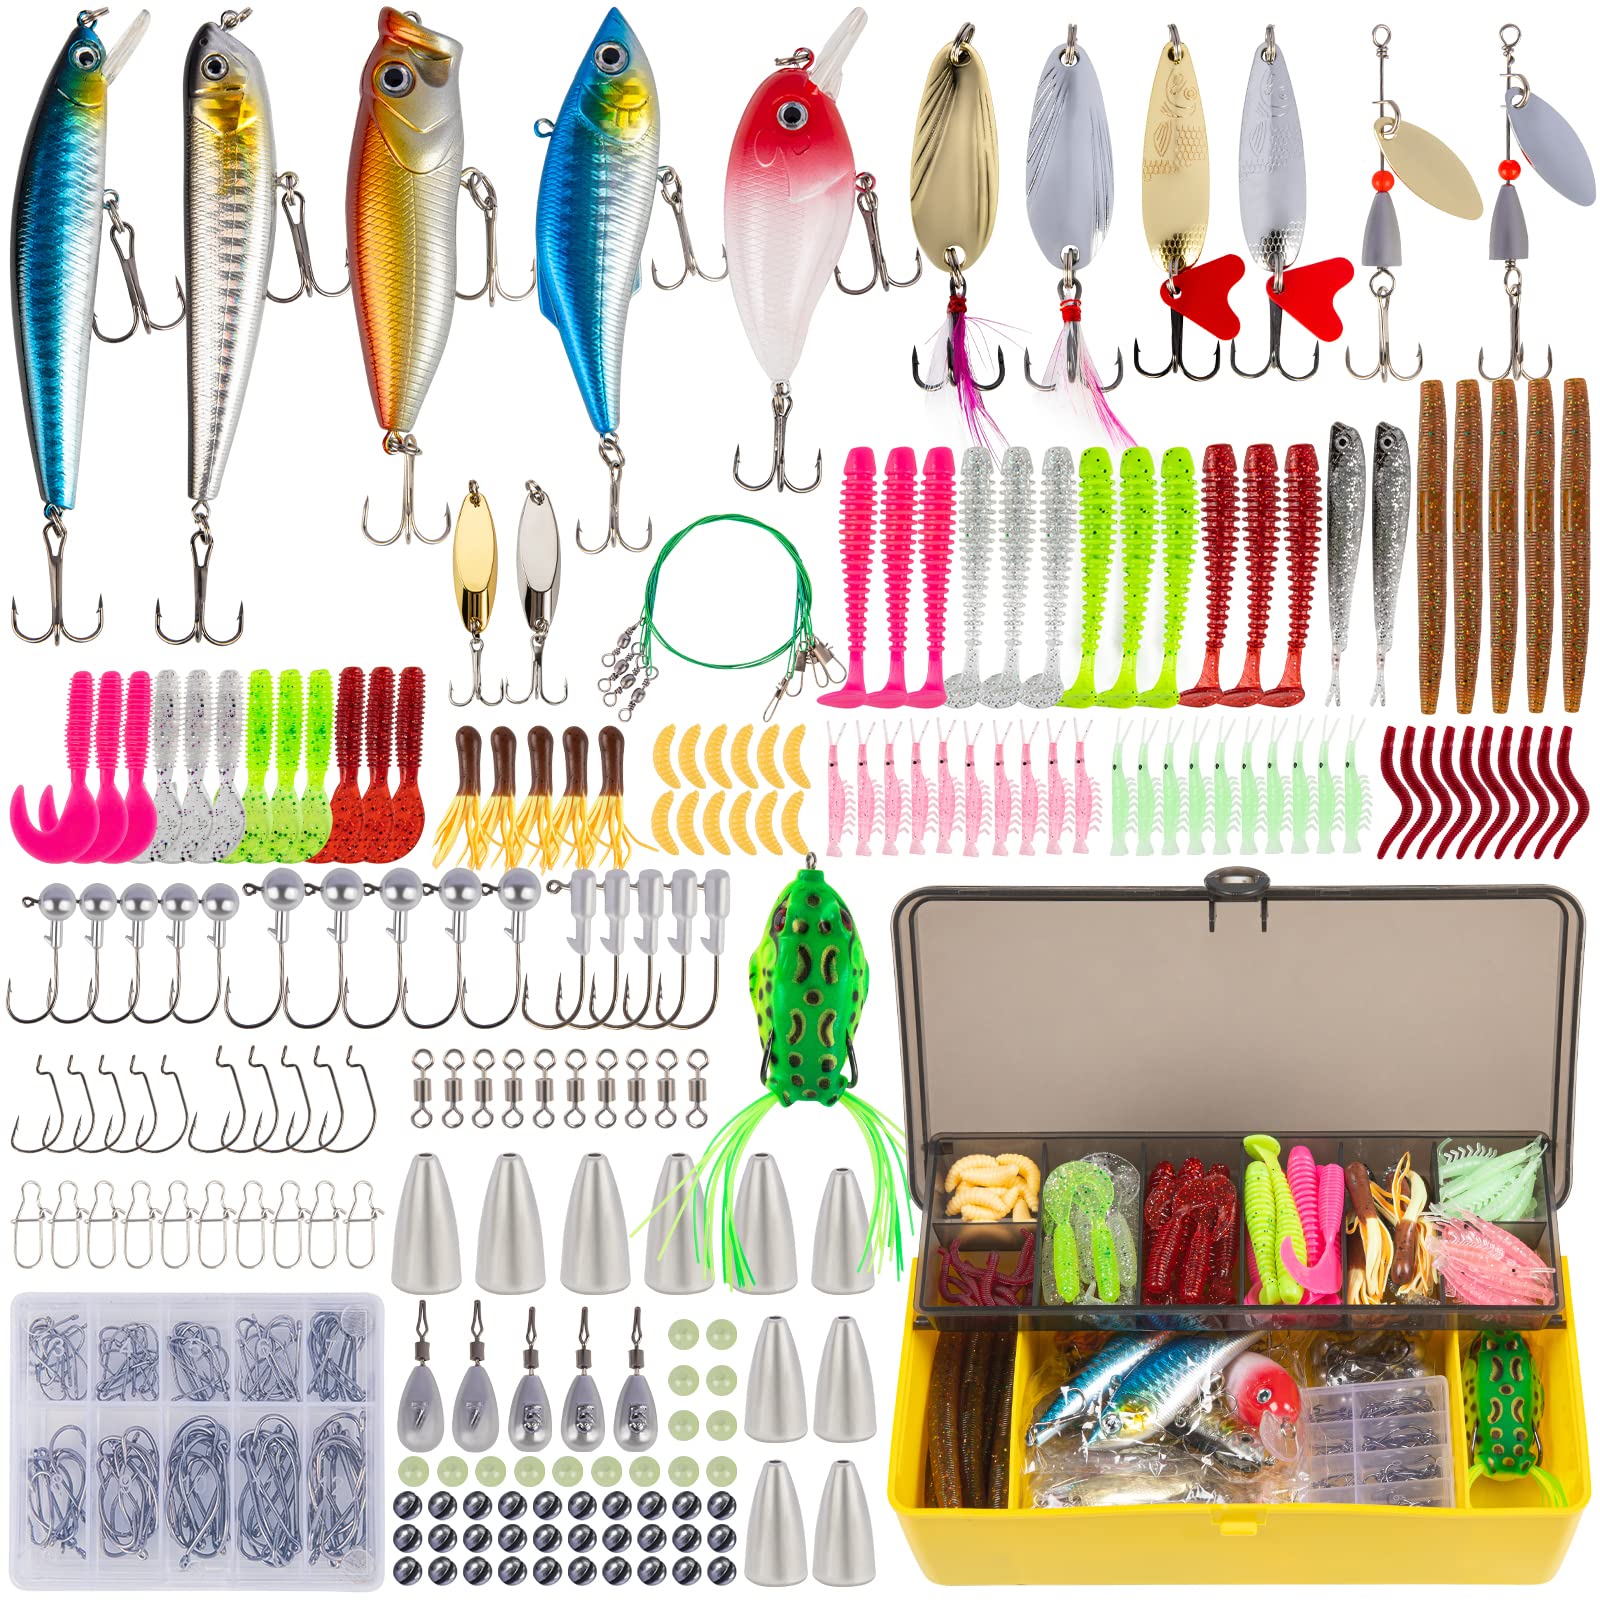 Shaddock Fishing Fishing Accessories Tackle Kit - 204pcs Fishing Worm Hooks  and Weights Kit Fishing Spoons Swivel Snaps for Bass Fishing Tackle Set